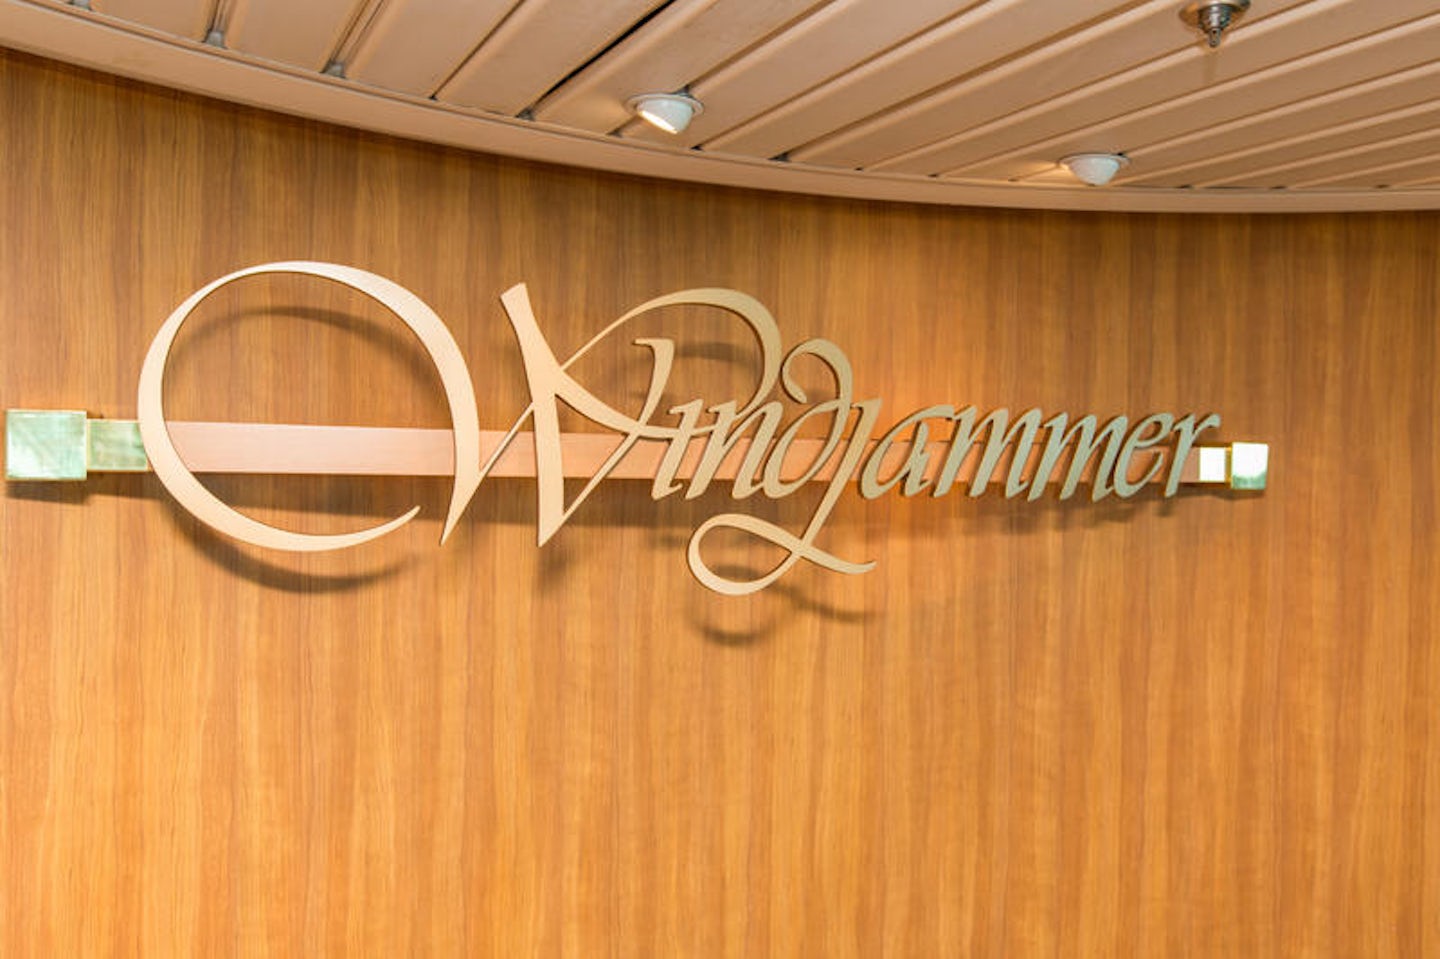 Windjammer Cafe on Vision of the Seas